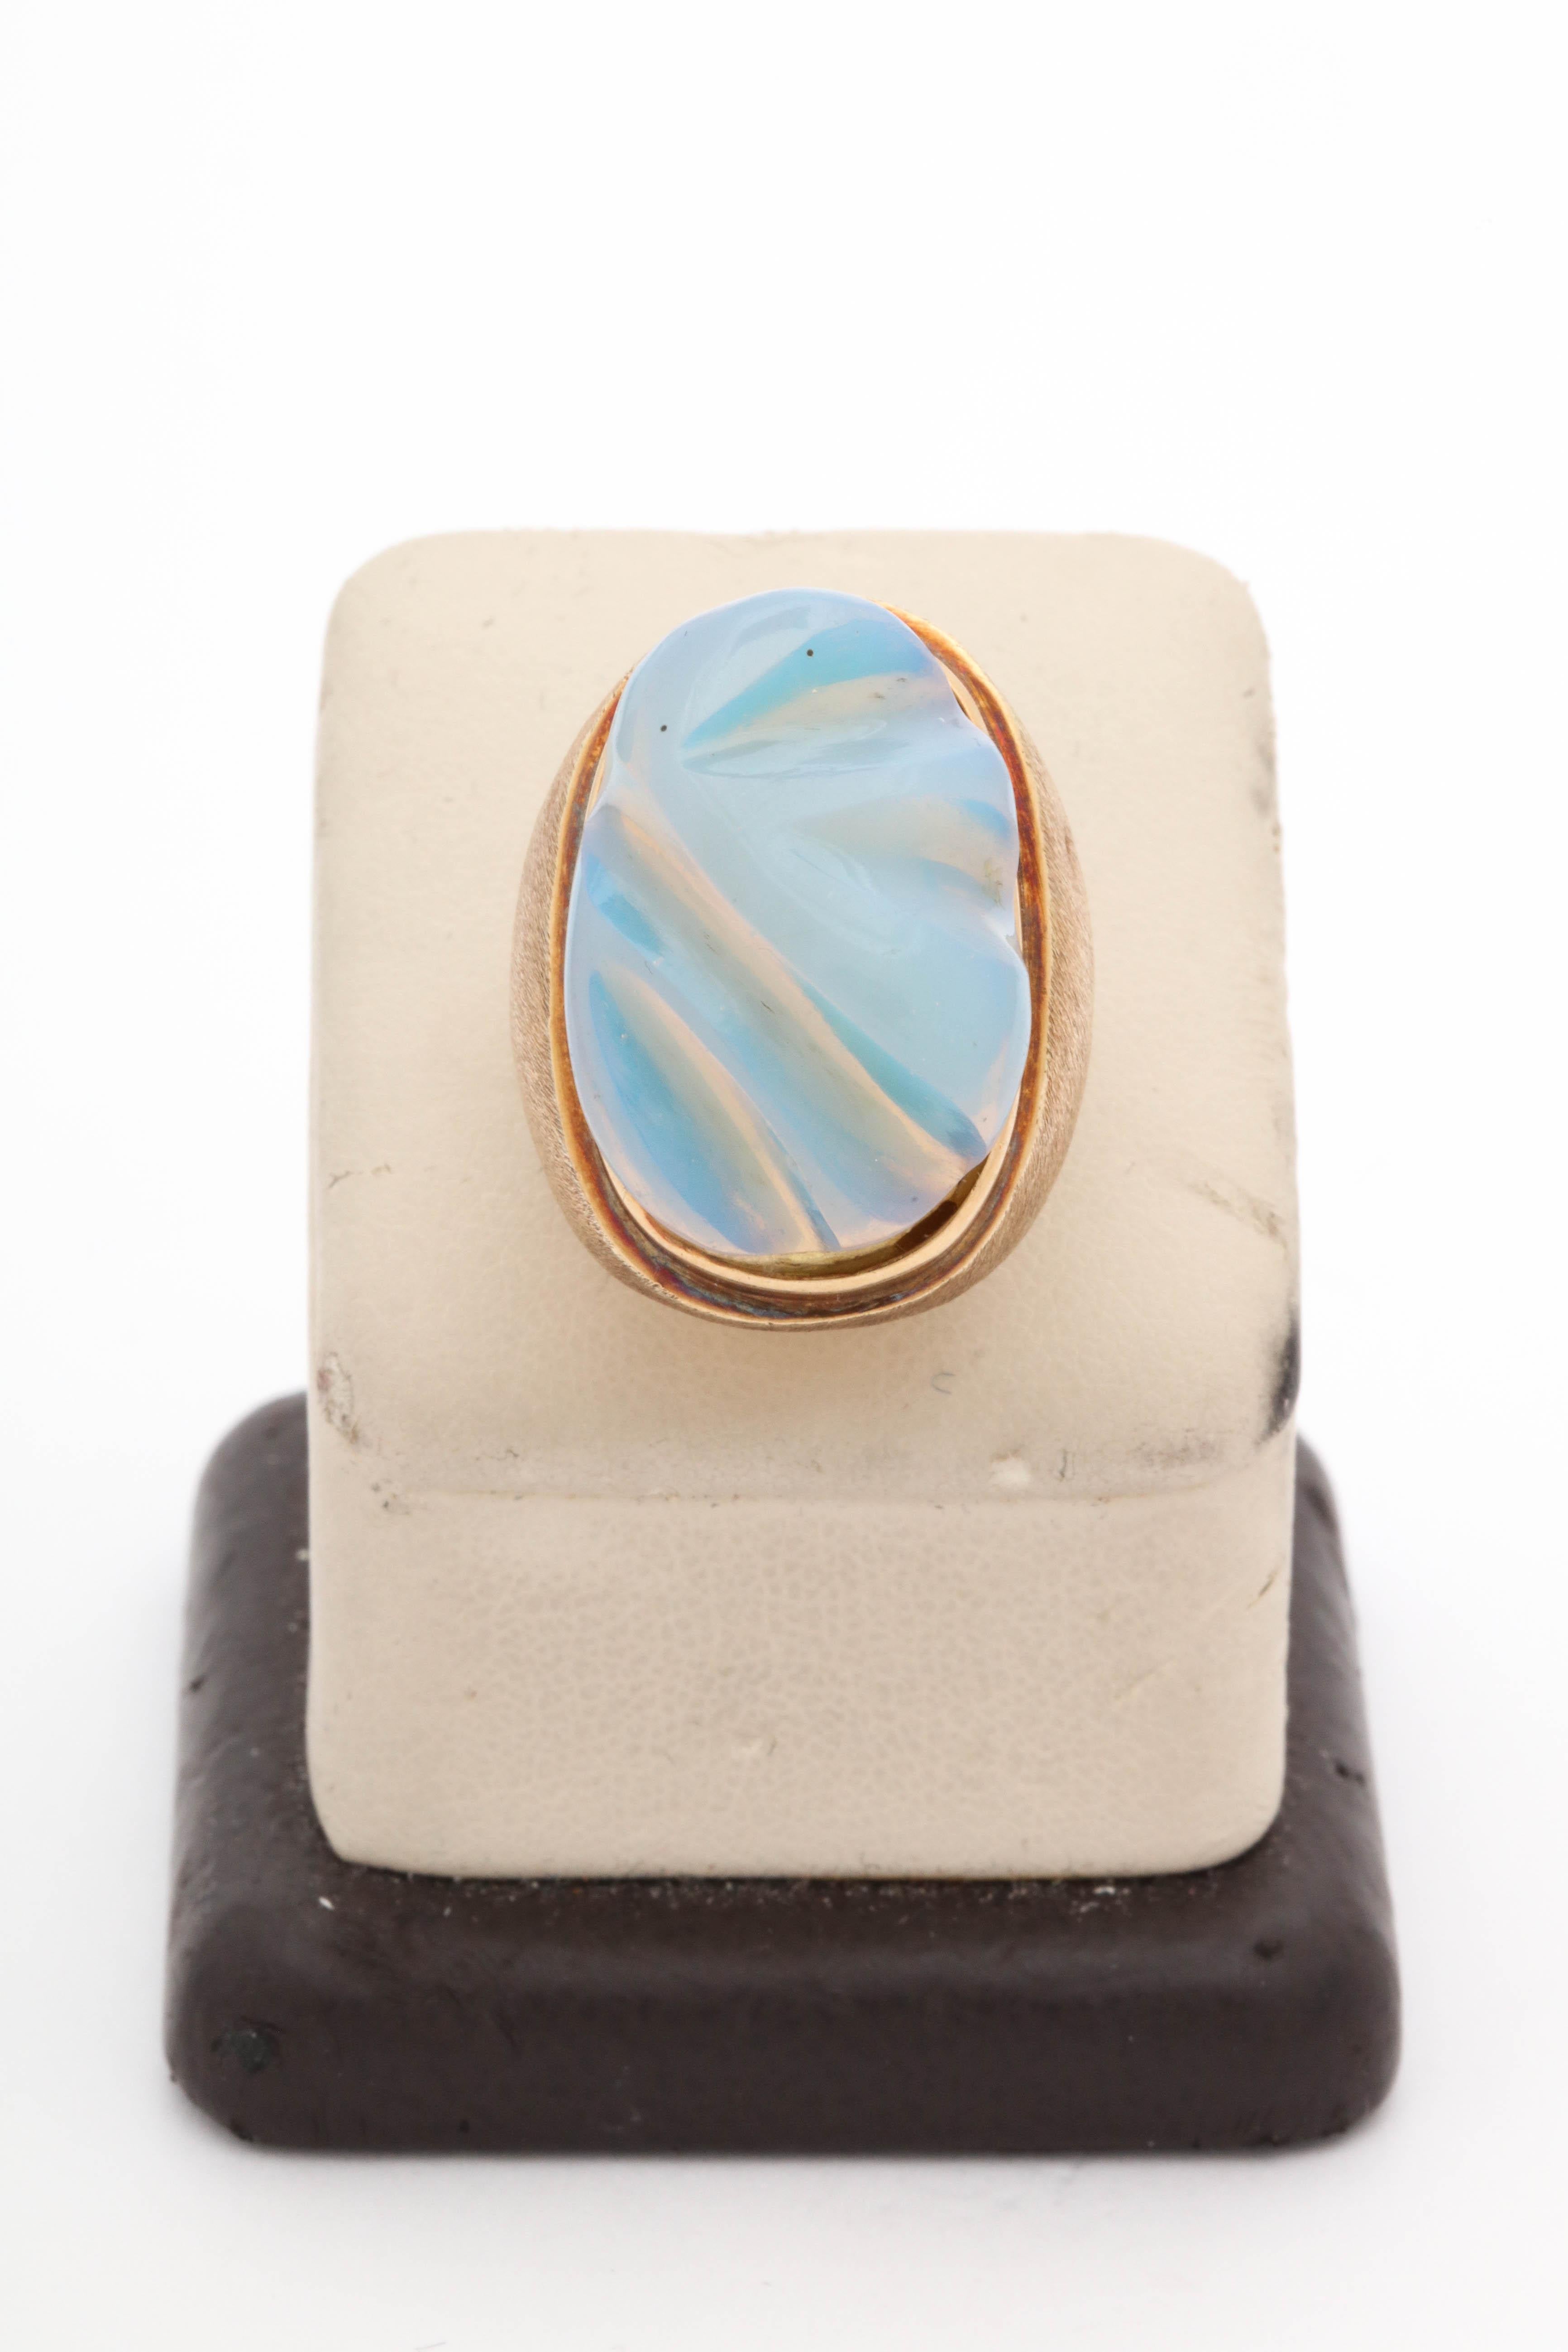 One Dramatic And Unusual Large High Quality Carved  High Iridescent Cocktail Ring Attributed To Burle Marx[ A High End Jewelry Designer From Brazil] This Ring Is Unusual To Find In An Opal! Set In 18kt Gold It Is A True Unusual Beauty. created In